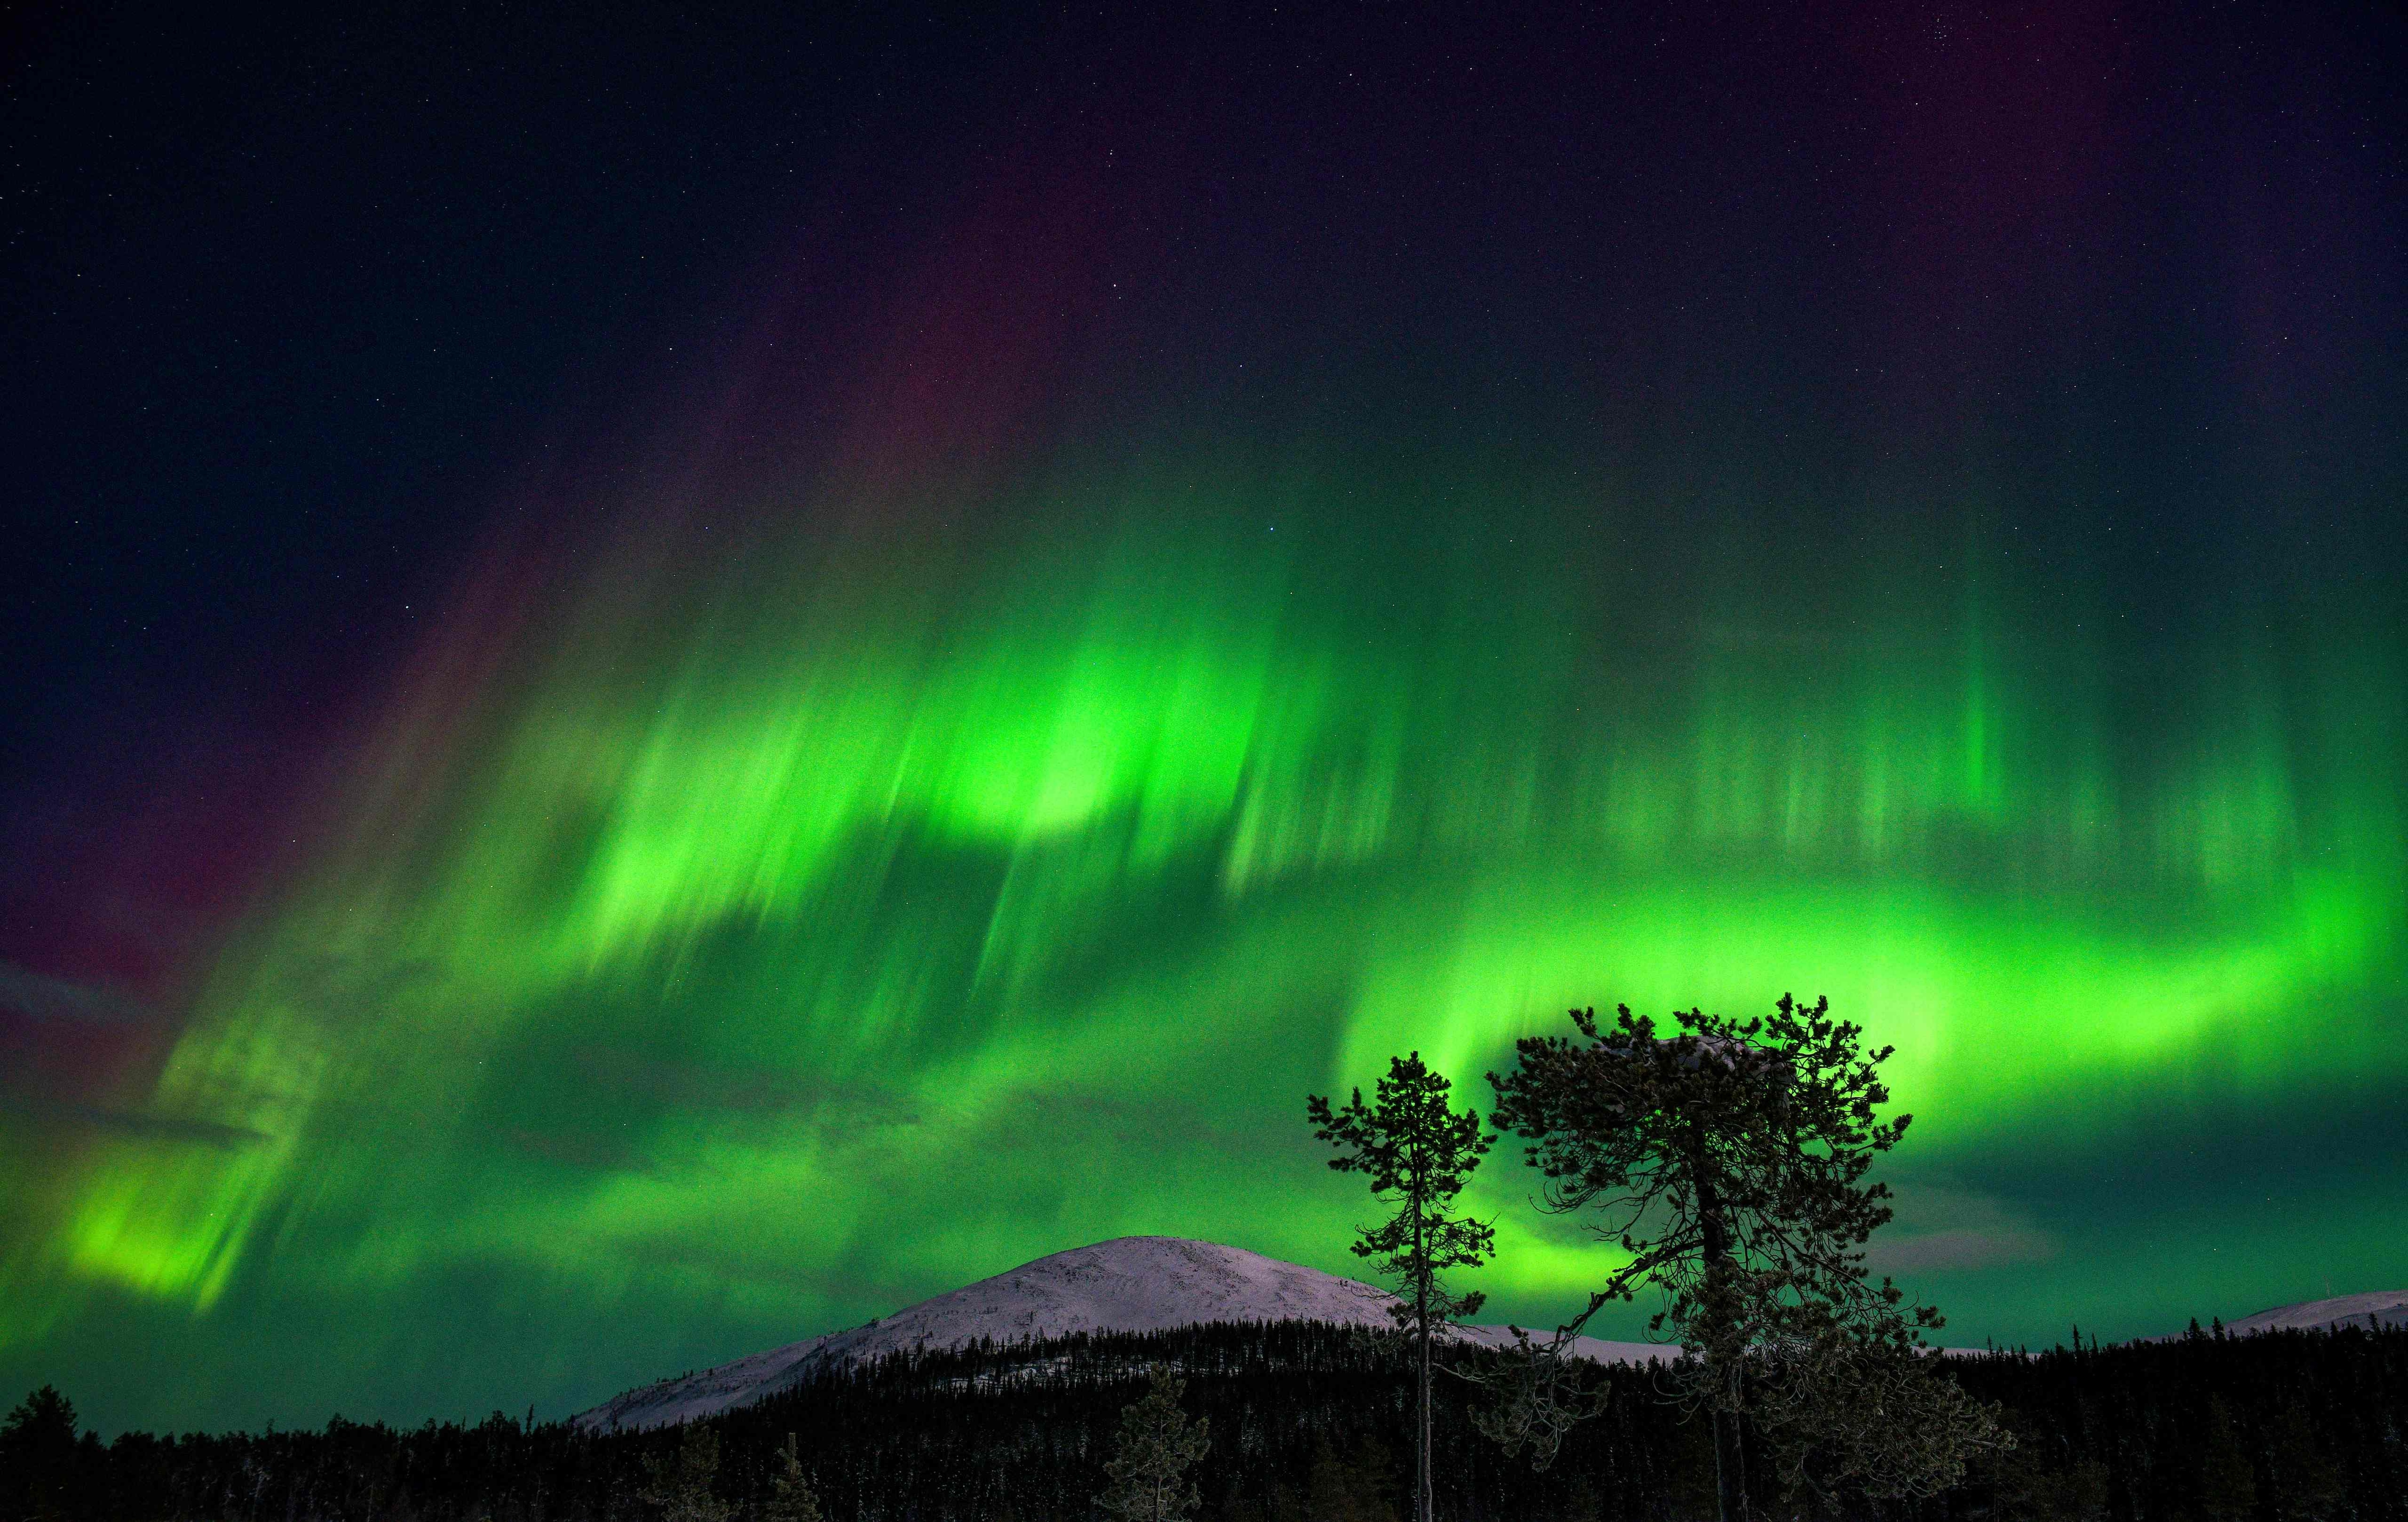 In Pics: What are Northern lights? 5 facts about this stunning